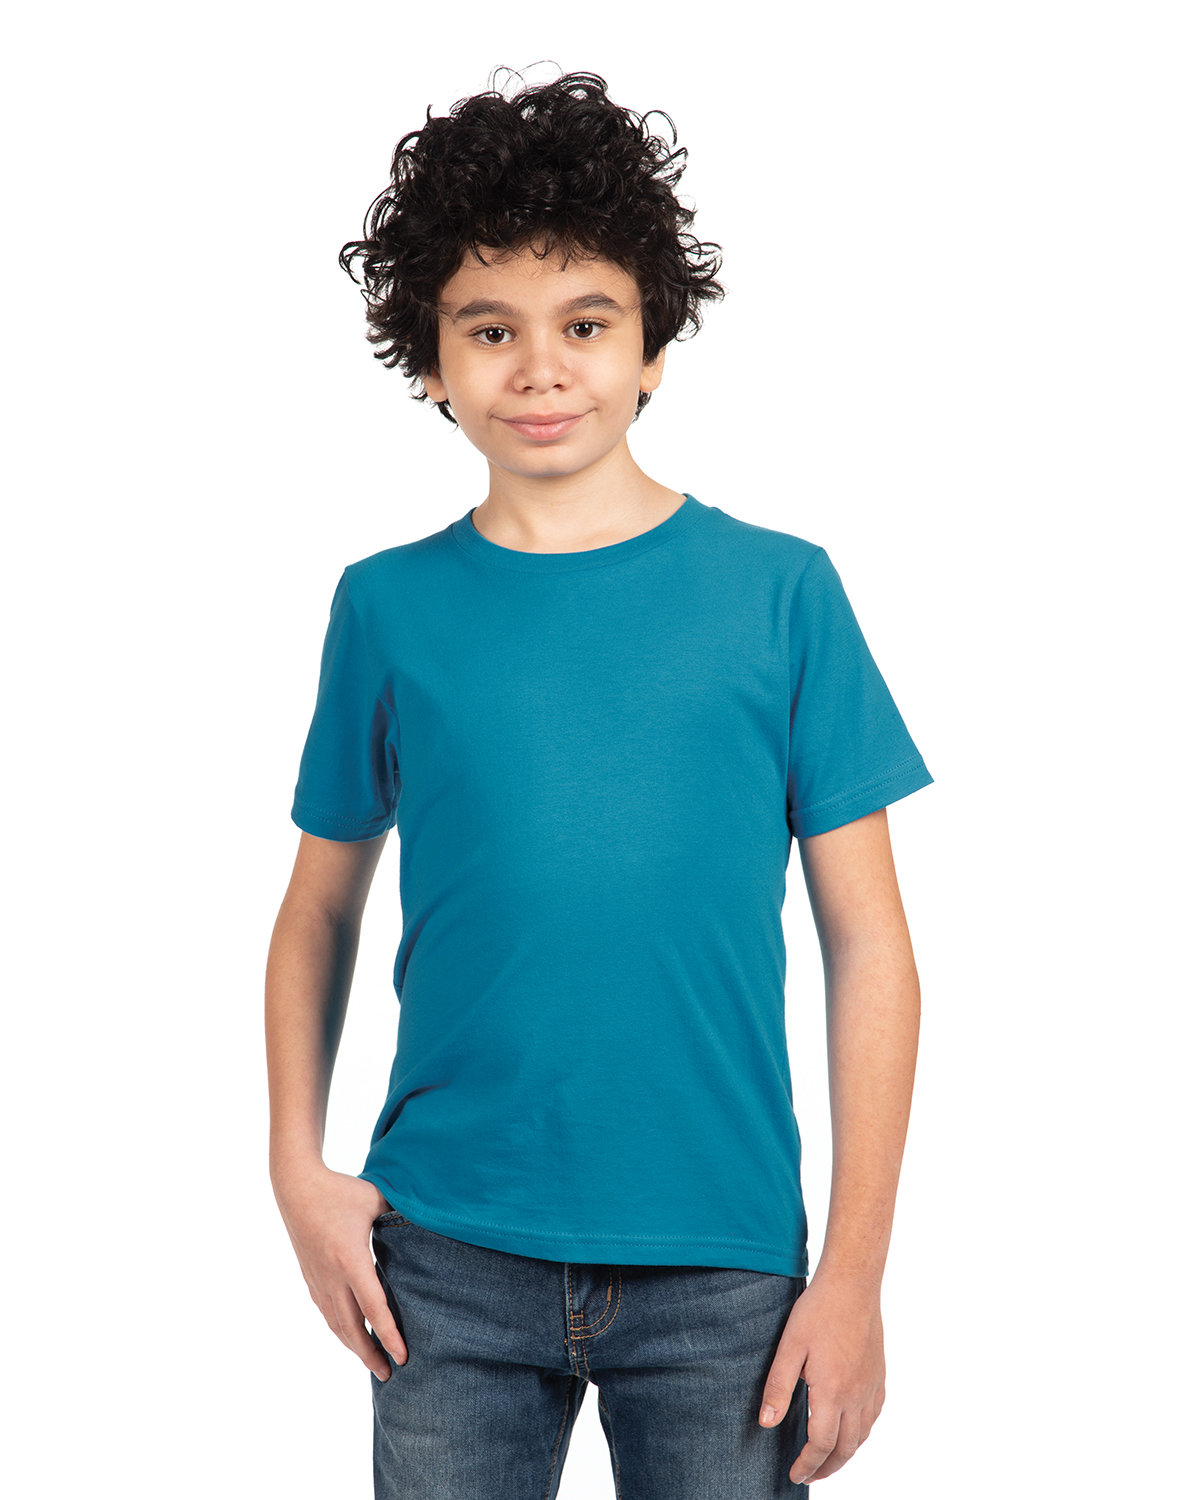 Next Level Apparel Youth Boys’ Cotton Crew TURQUOISE 